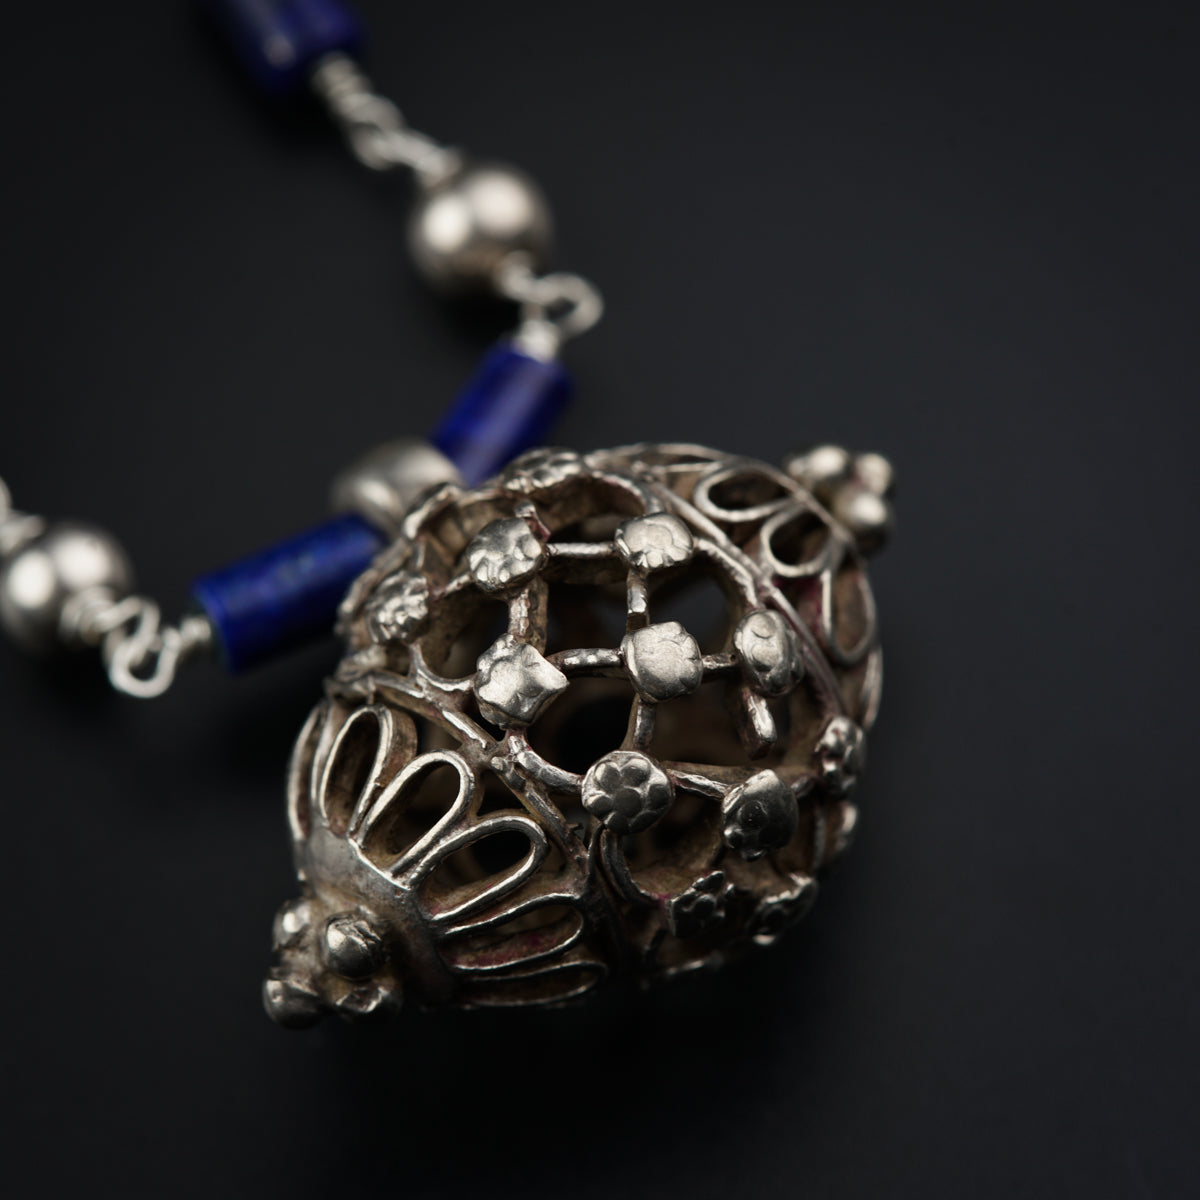 a silver and blue beaded necklace on a black surface